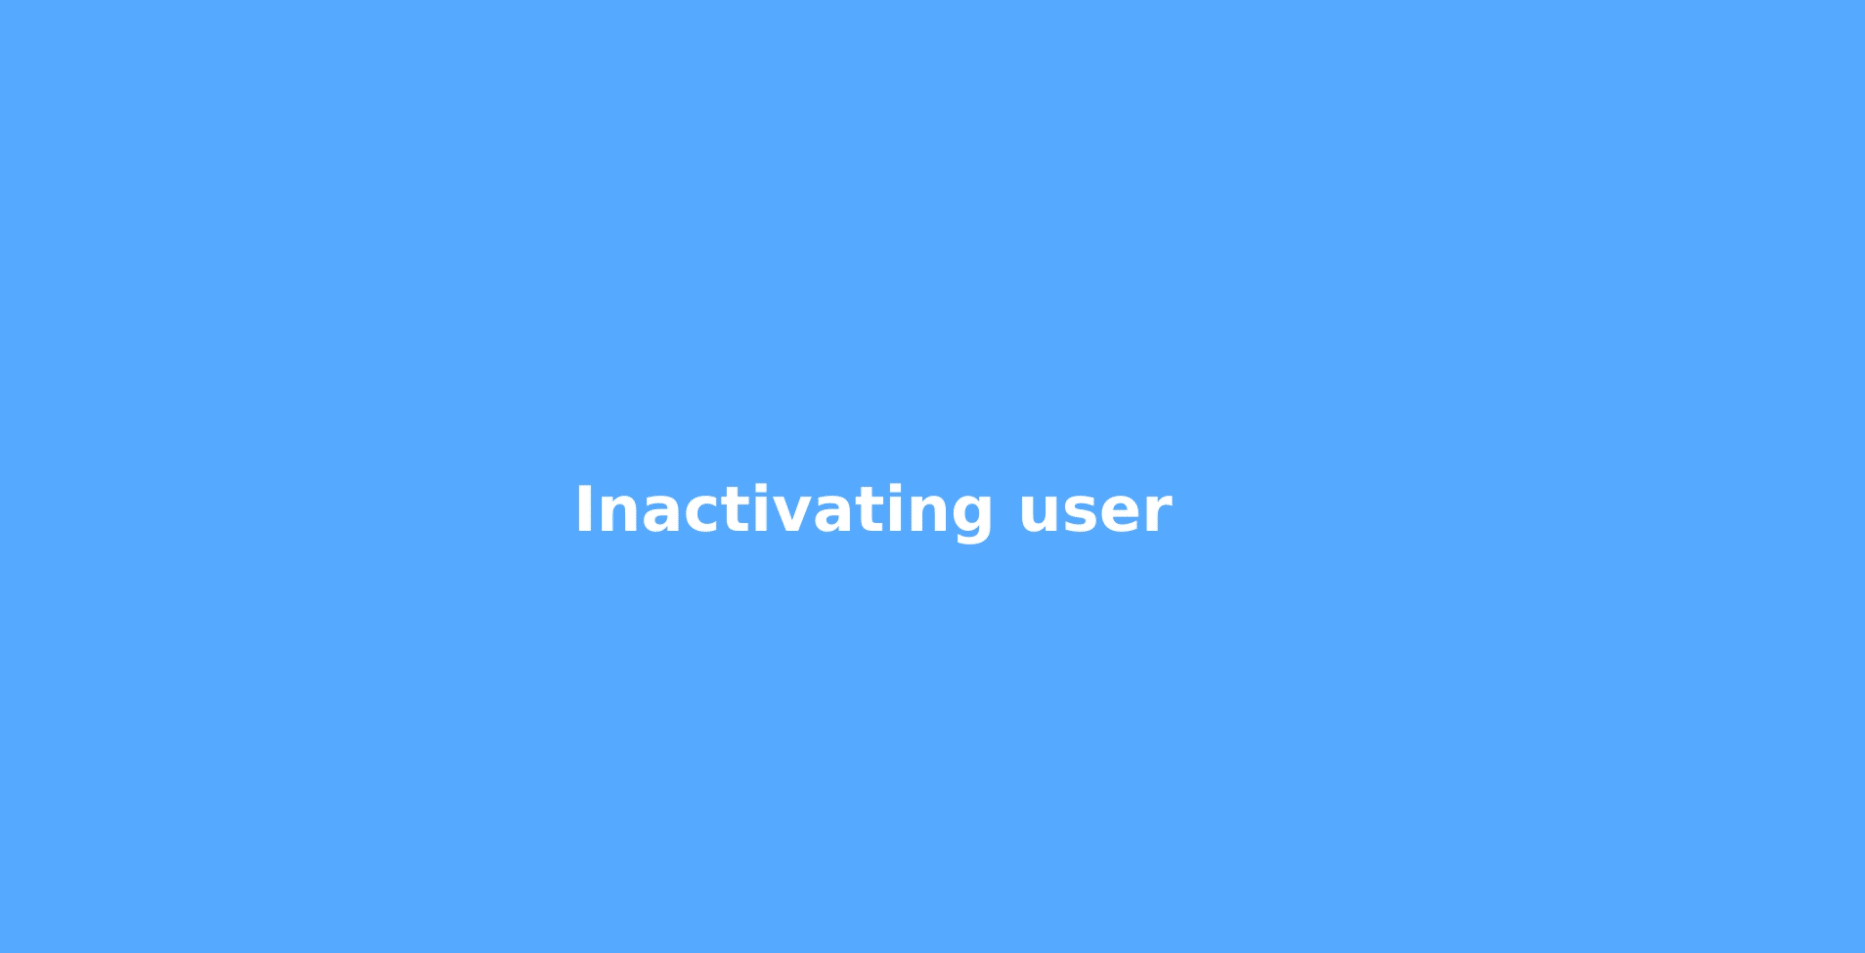 sequence of steps to inactivate user